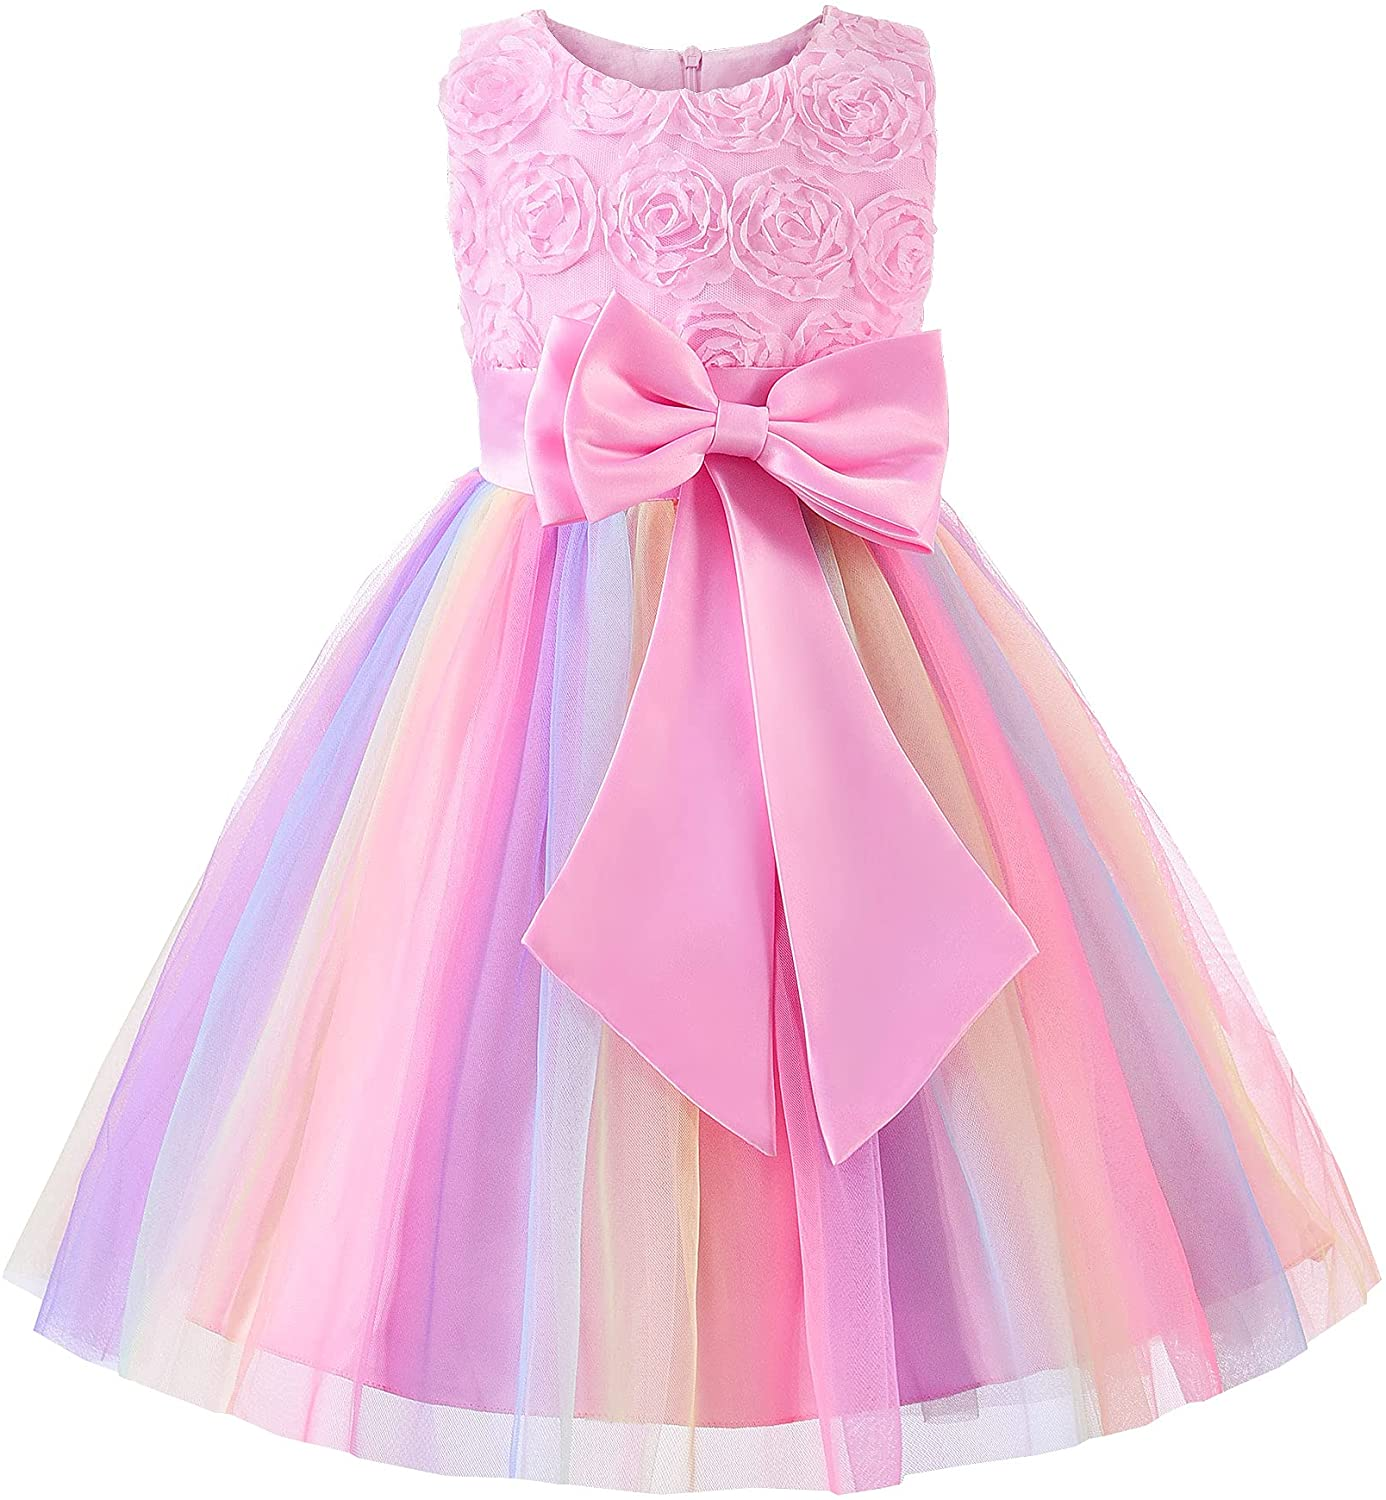 Sleeveless Tulle 3D Flower Rainbow Dress for Little Girls - Perfect for Weddings, Parties and Dress Up!